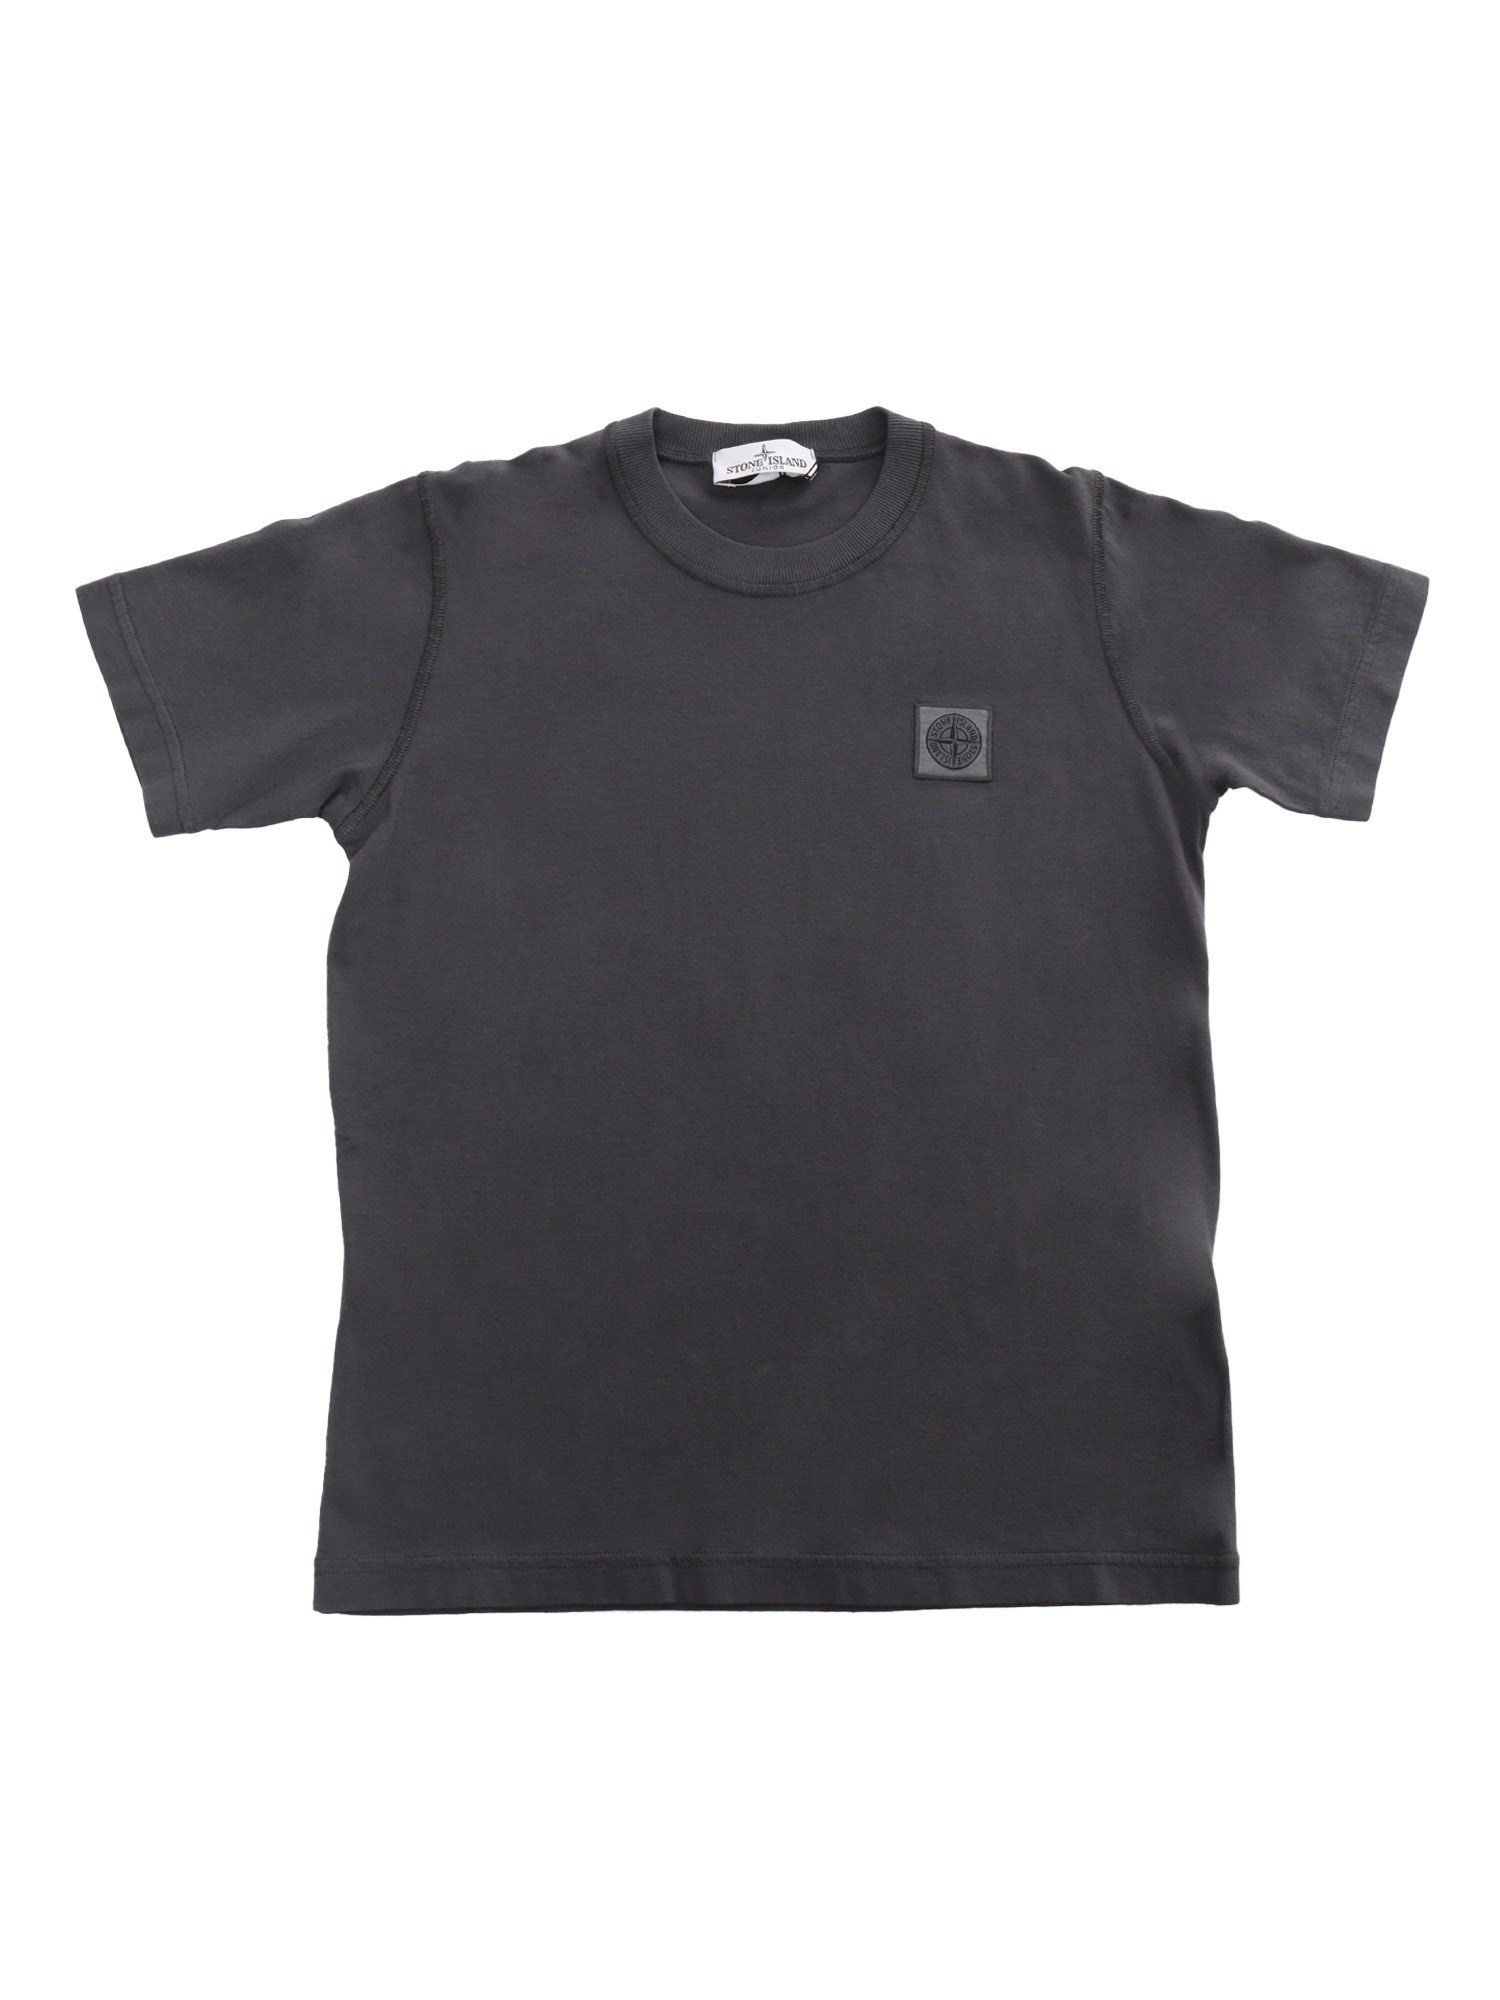 Stone Island Black T-shirt With Logo In Gray